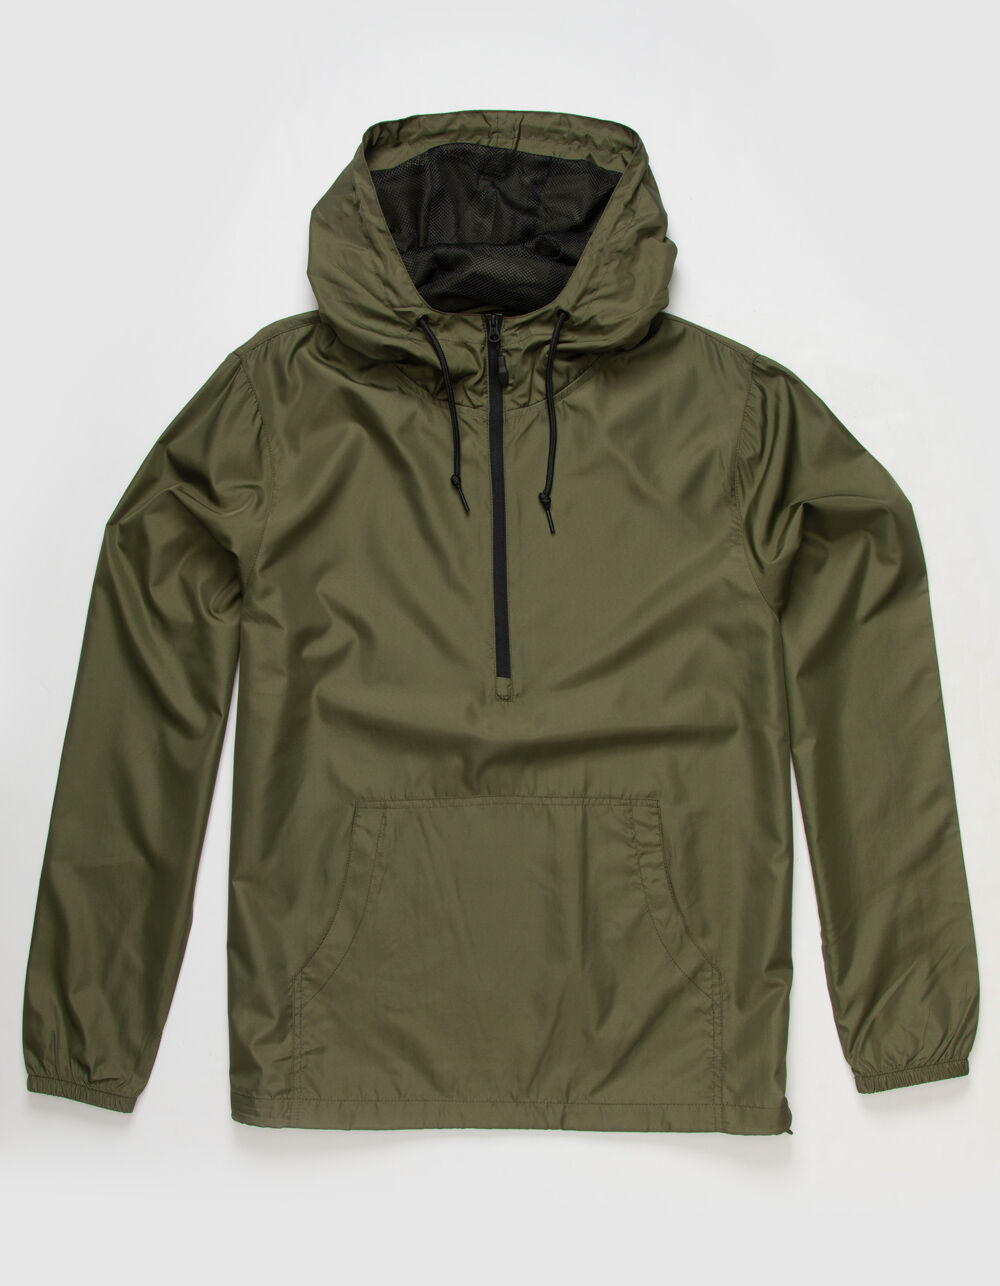 Pullover Windbreaker Anorak Jacket  Independent Trading Co. - Independent  Trading Company